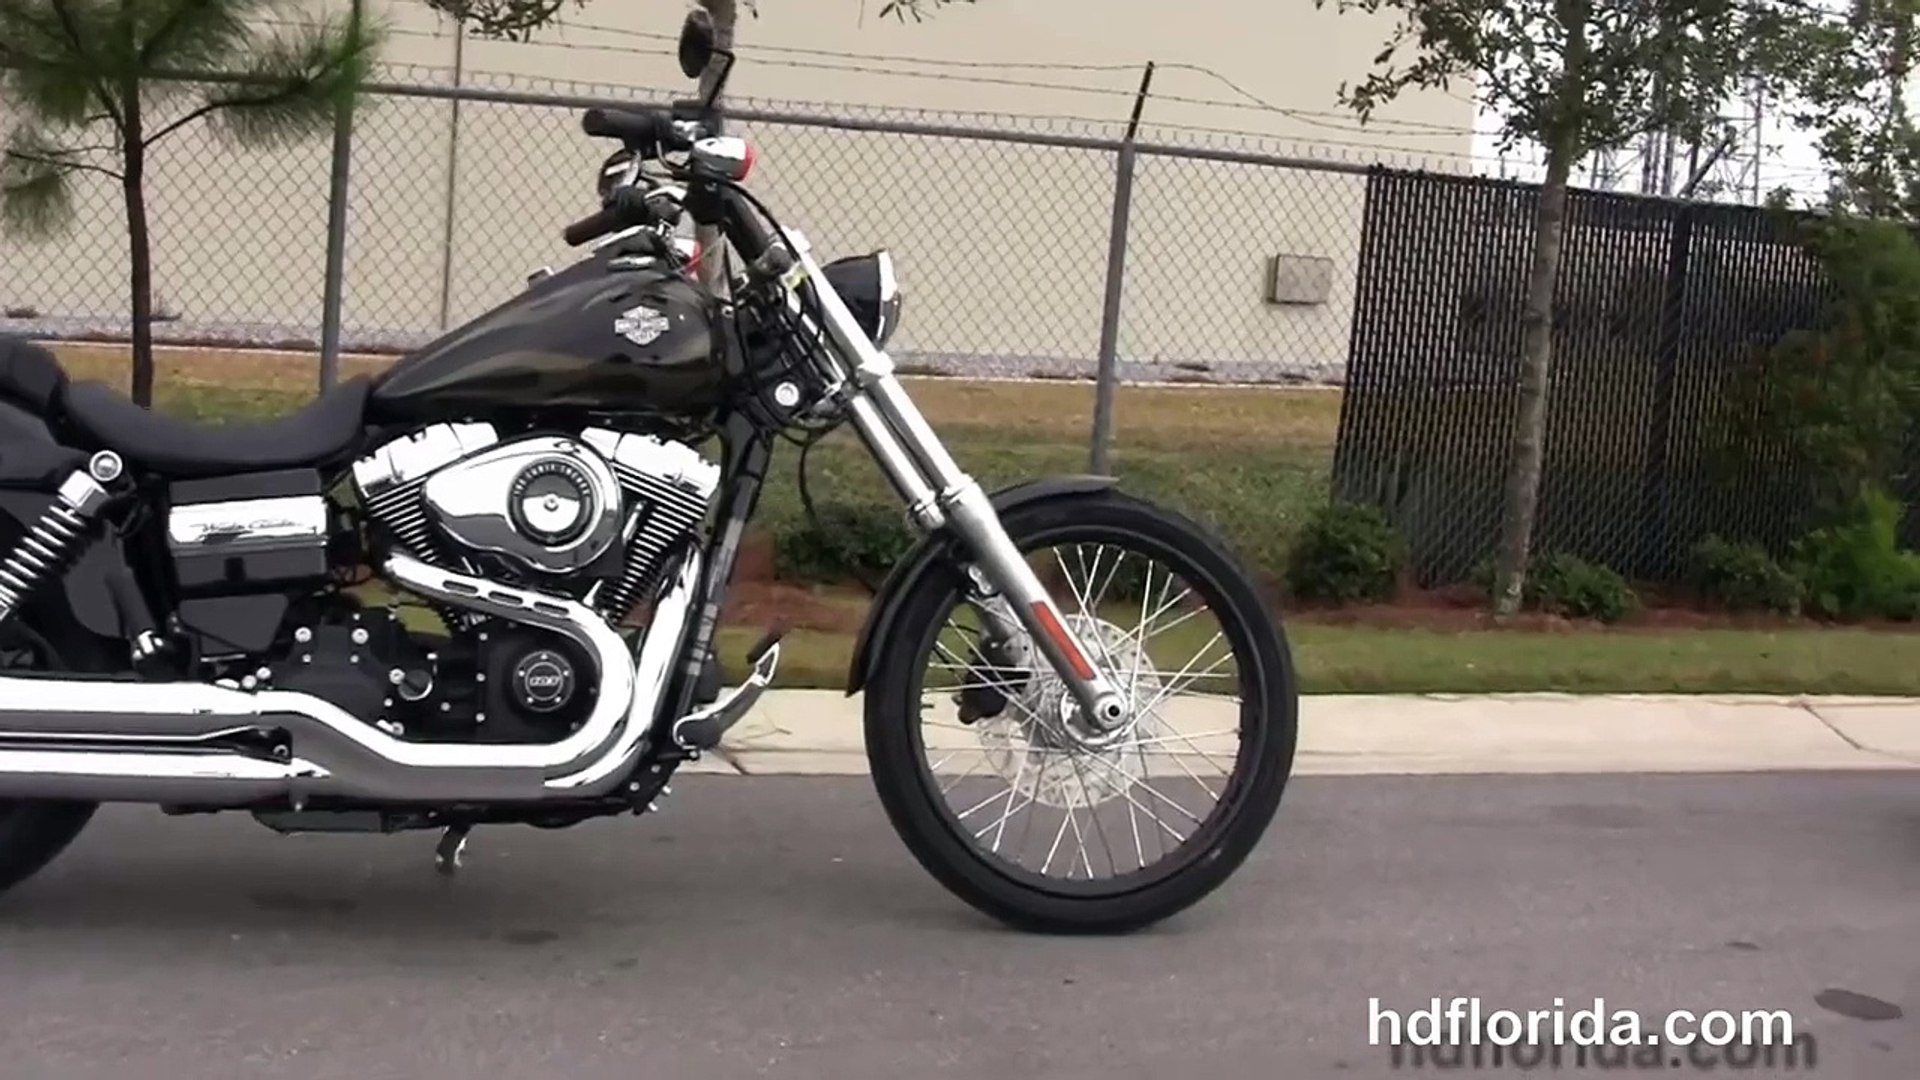 New 2015 Harley Davidson Wide Glide Motorcycles for sale